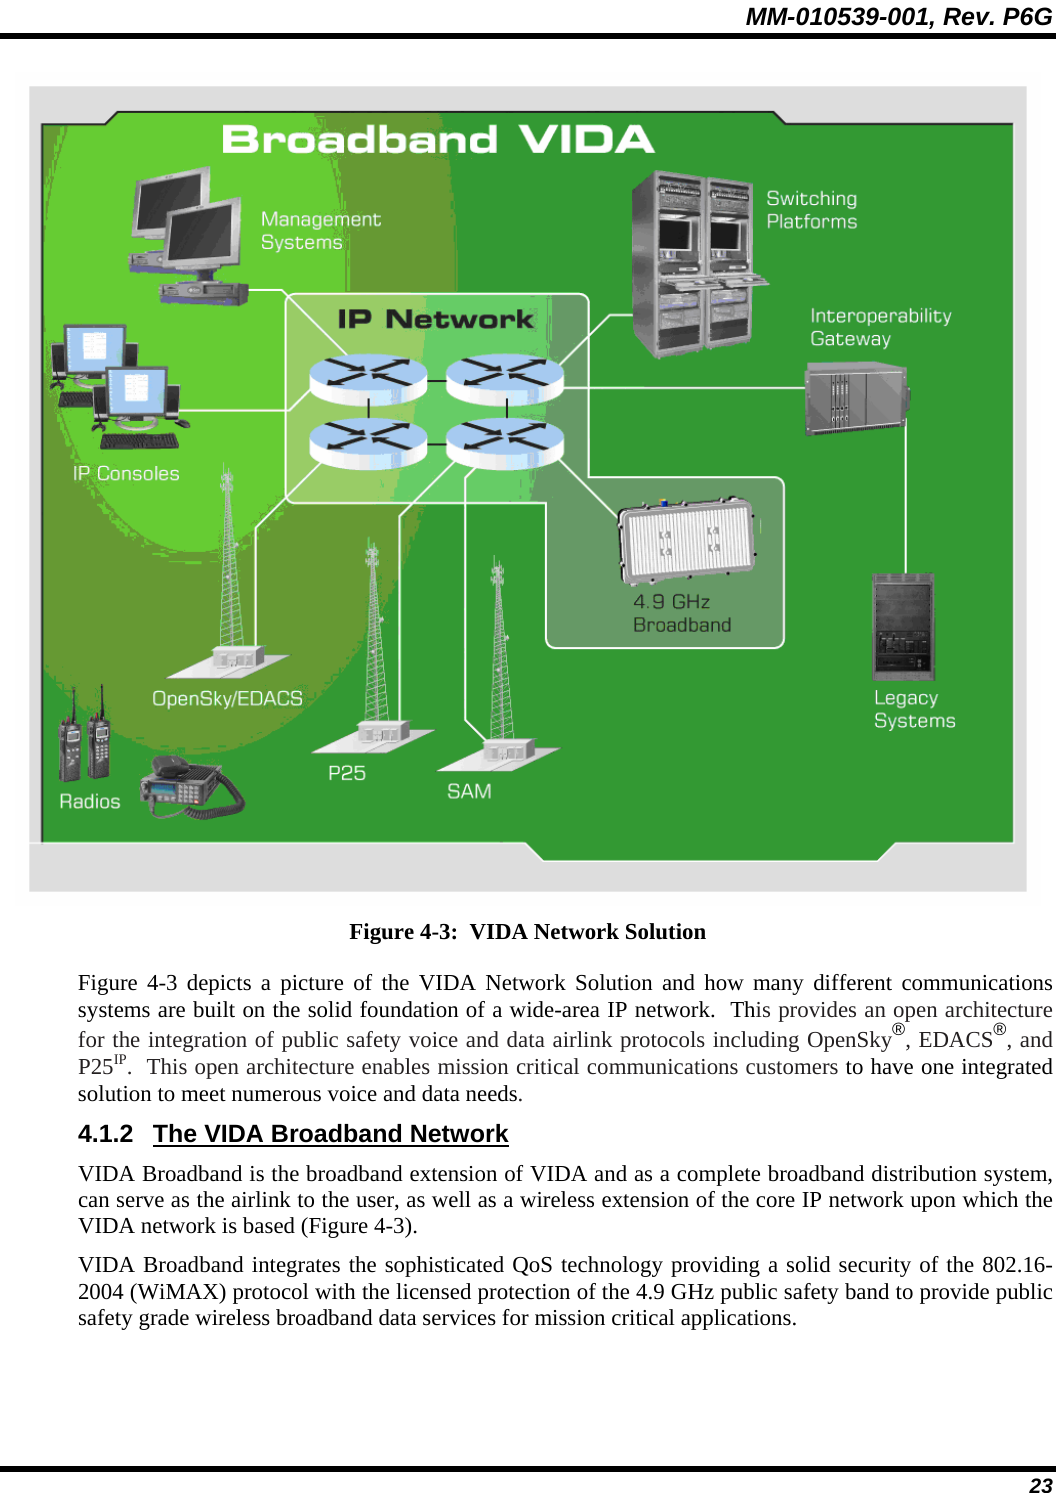 MM-010539-001, Rev. P6G  23  Figure 4-3:  VIDA Network Solution  Figure 4-3 depicts a picture of the VIDA Network Solution and how many different communications systems are built on the solid foundation of a wide-area IP network.  This provides an open architecture for the integration of public safety voice and data airlink protocols including OpenSky®, EDACS®, and P25IP.  This open architecture enables mission critical communications customers to have one integrated solution to meet numerous voice and data needs.   4.1.2  The VIDA Broadband Network VIDA Broadband is the broadband extension of VIDA and as a complete broadband distribution system, can serve as the airlink to the user, as well as a wireless extension of the core IP network upon which the VIDA network is based (Figure 4-3).  VIDA Broadband integrates the sophisticated QoS technology providing a solid security of the 802.16-2004 (WiMAX) protocol with the licensed protection of the 4.9 GHz public safety band to provide public safety grade wireless broadband data services for mission critical applications.   